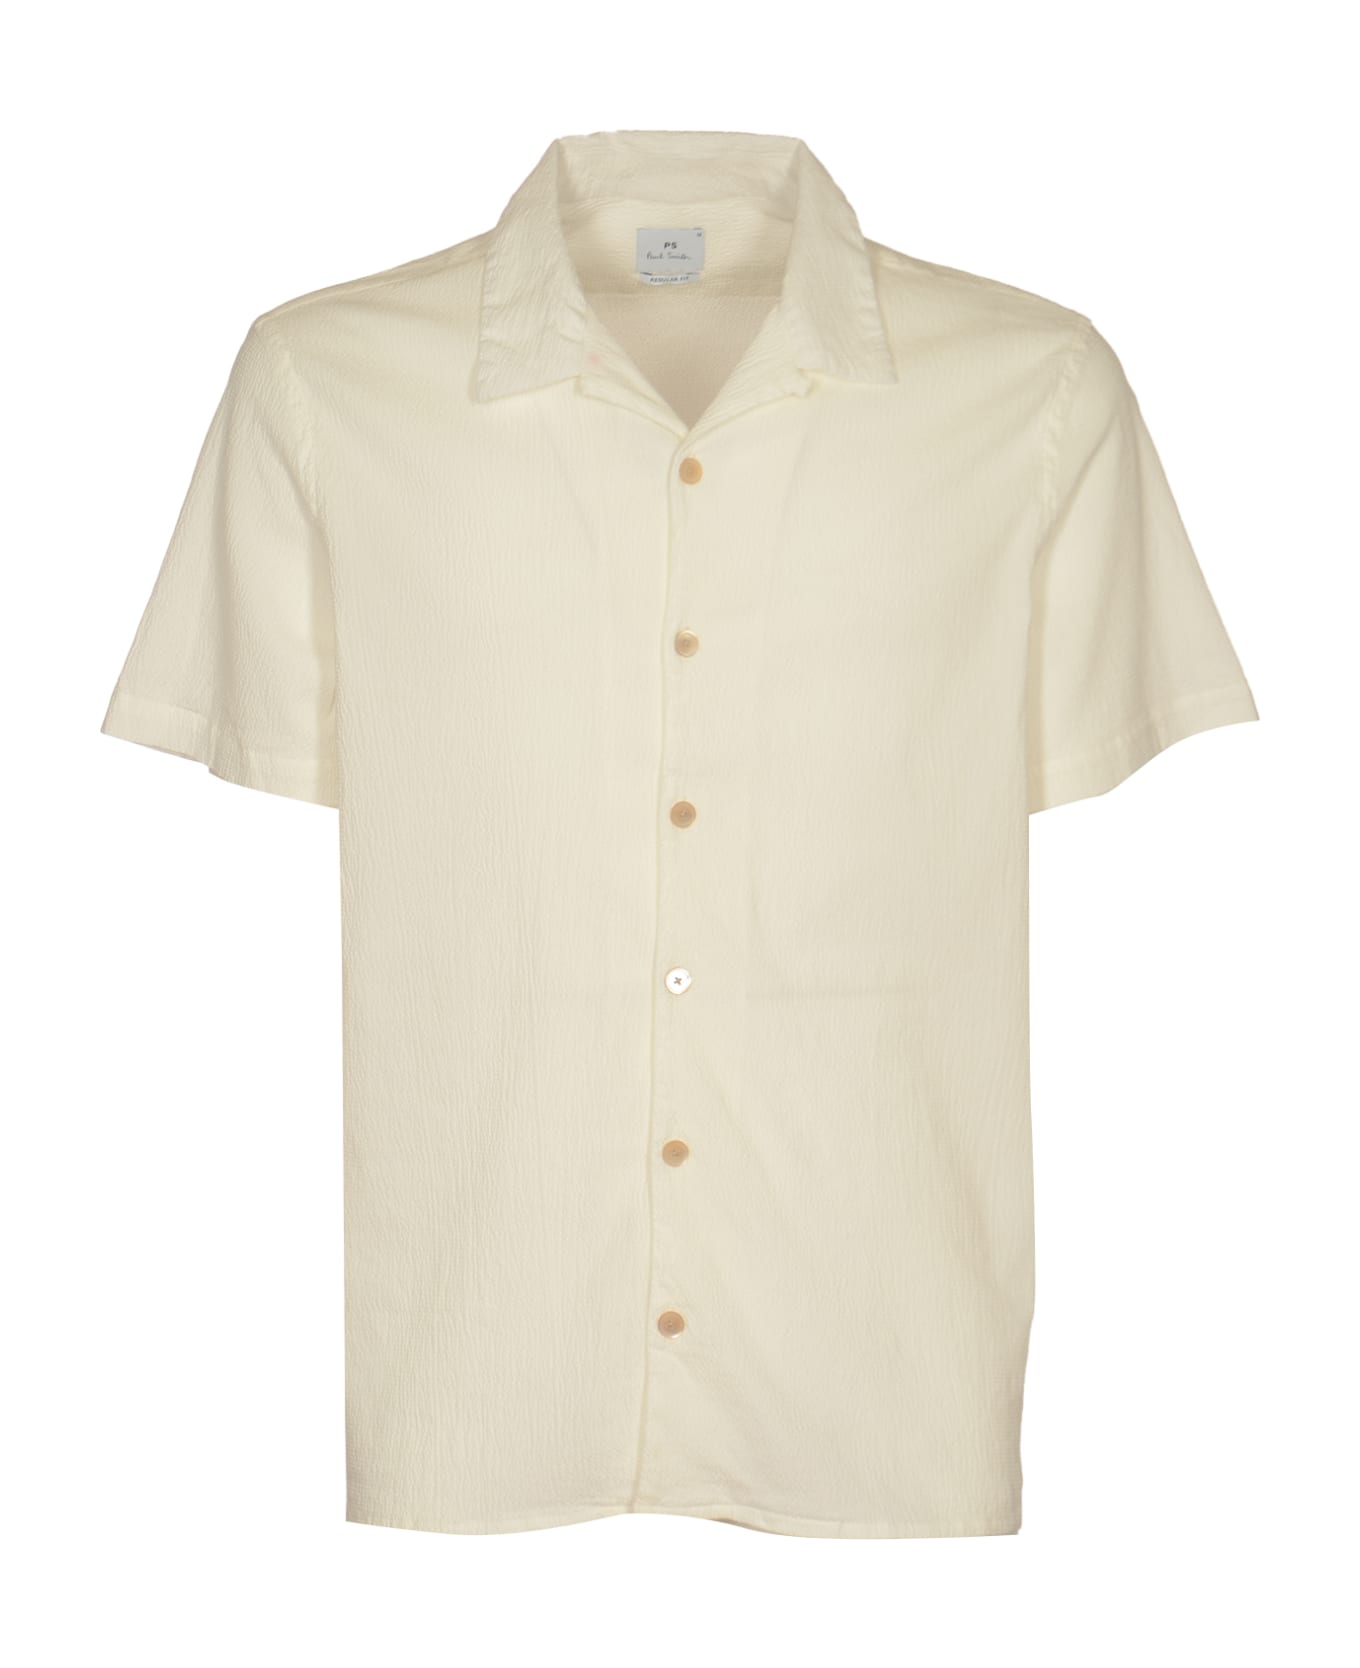 PS by Paul Smith Formal Plain Short-sleeved Shirt - WHITE